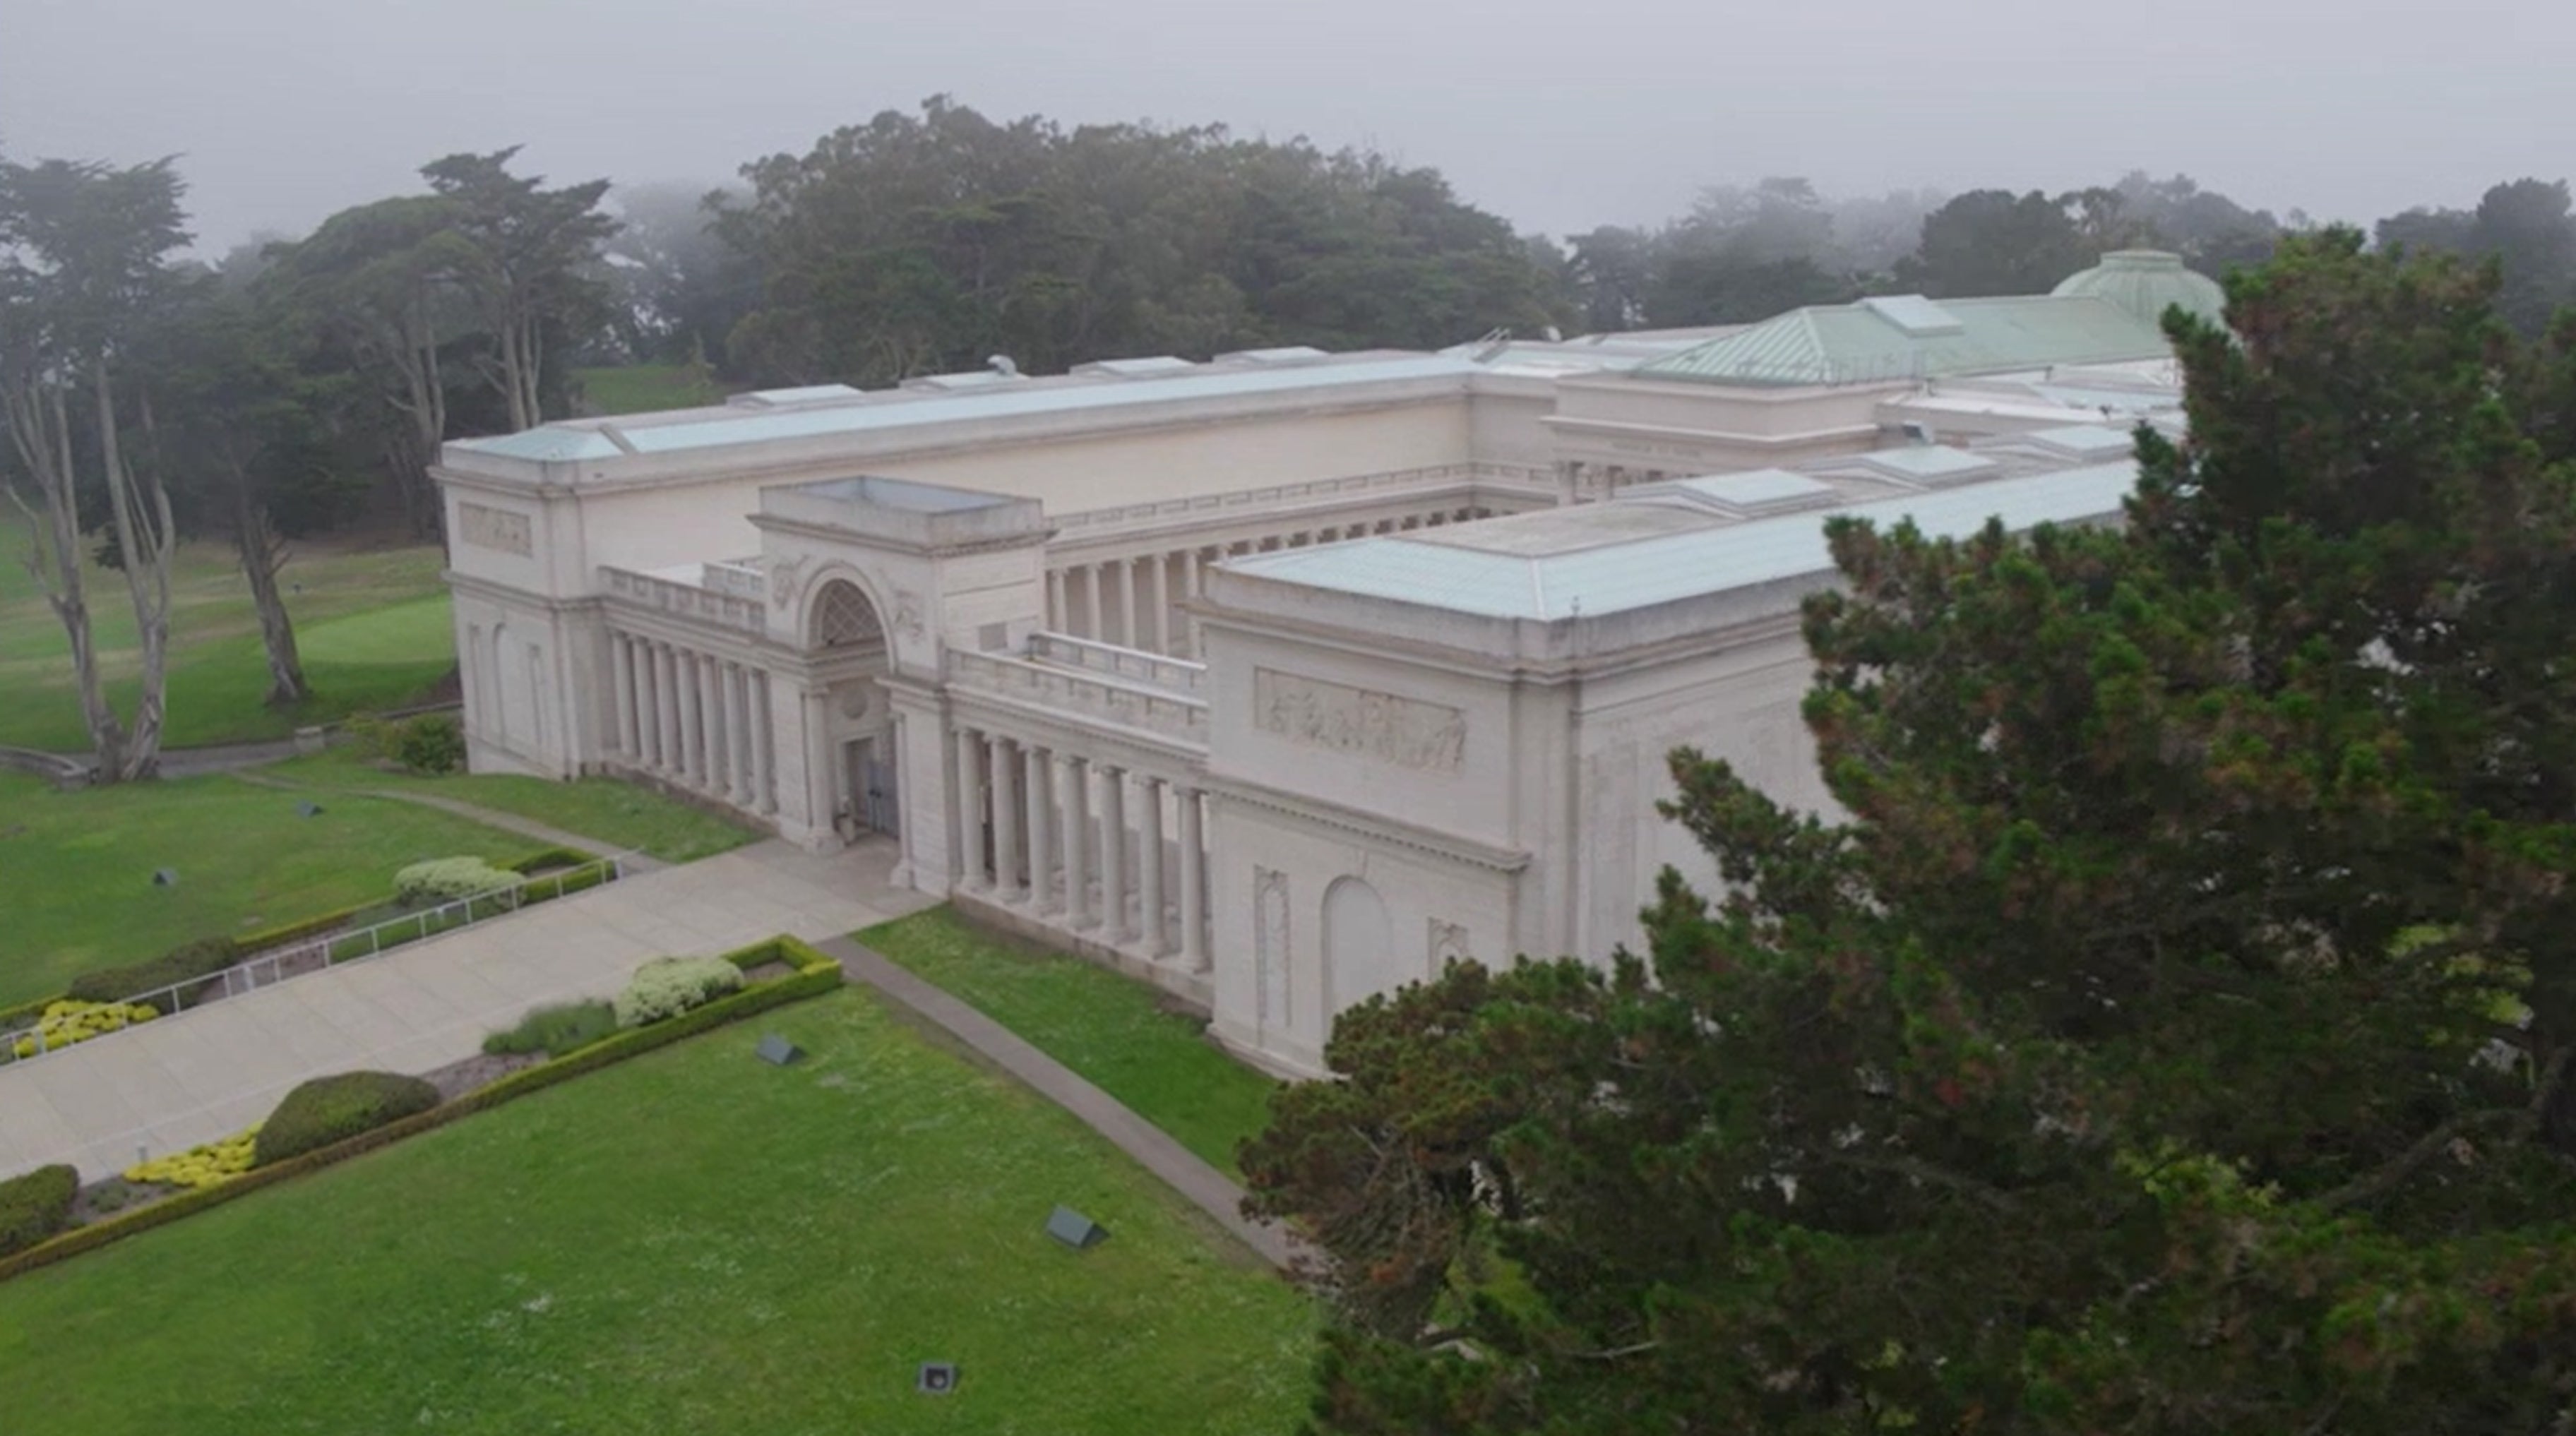 Drone footage showing the front of the Legion of Honor through the mist